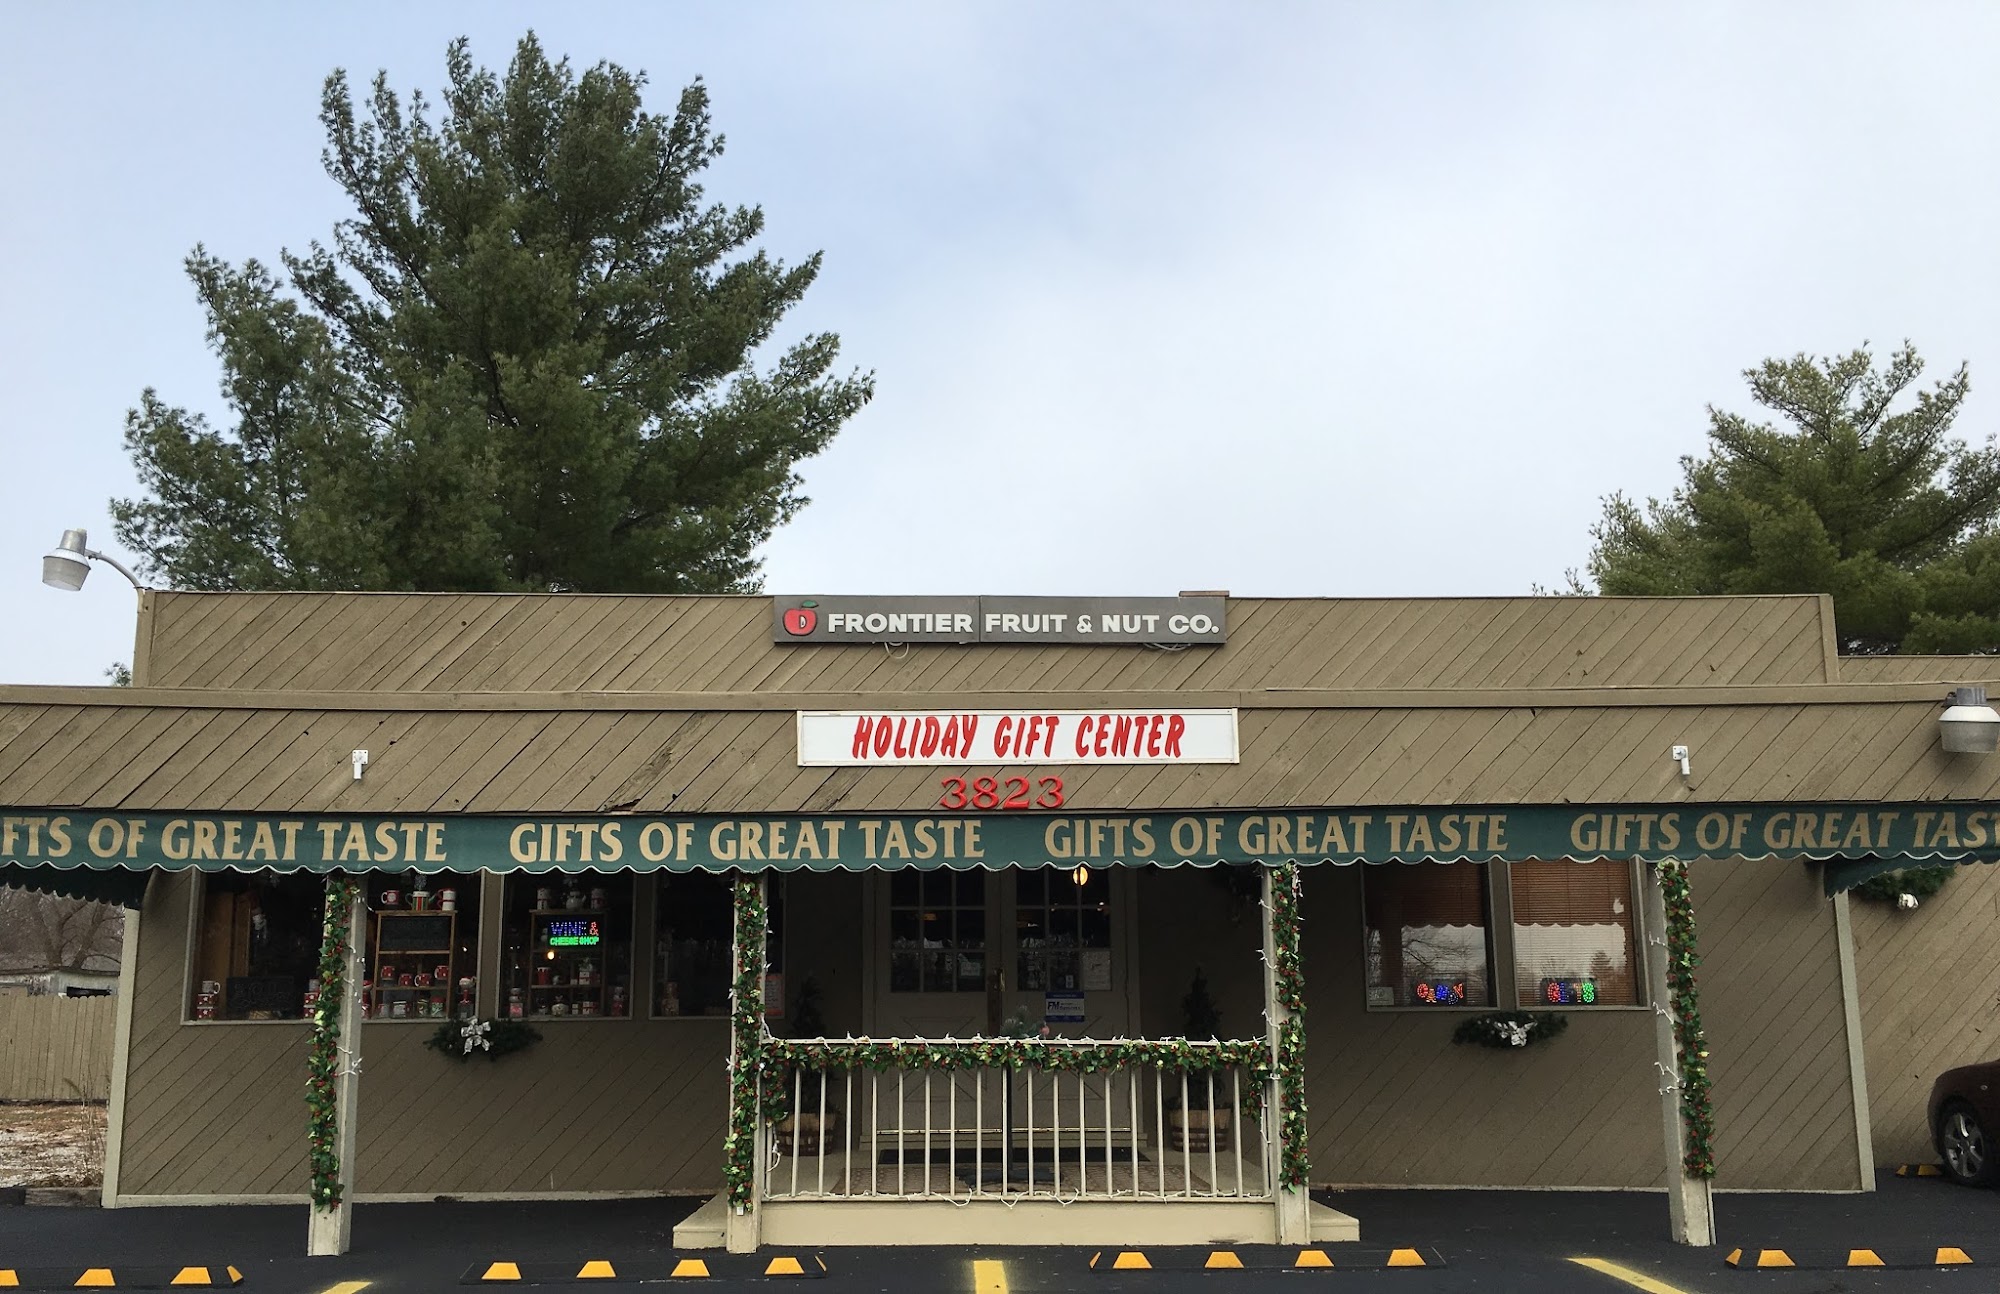 Gifts of Great Taste, Cookie Express, Frontier Fruit & Nut, Ohio Dairyland Cheese